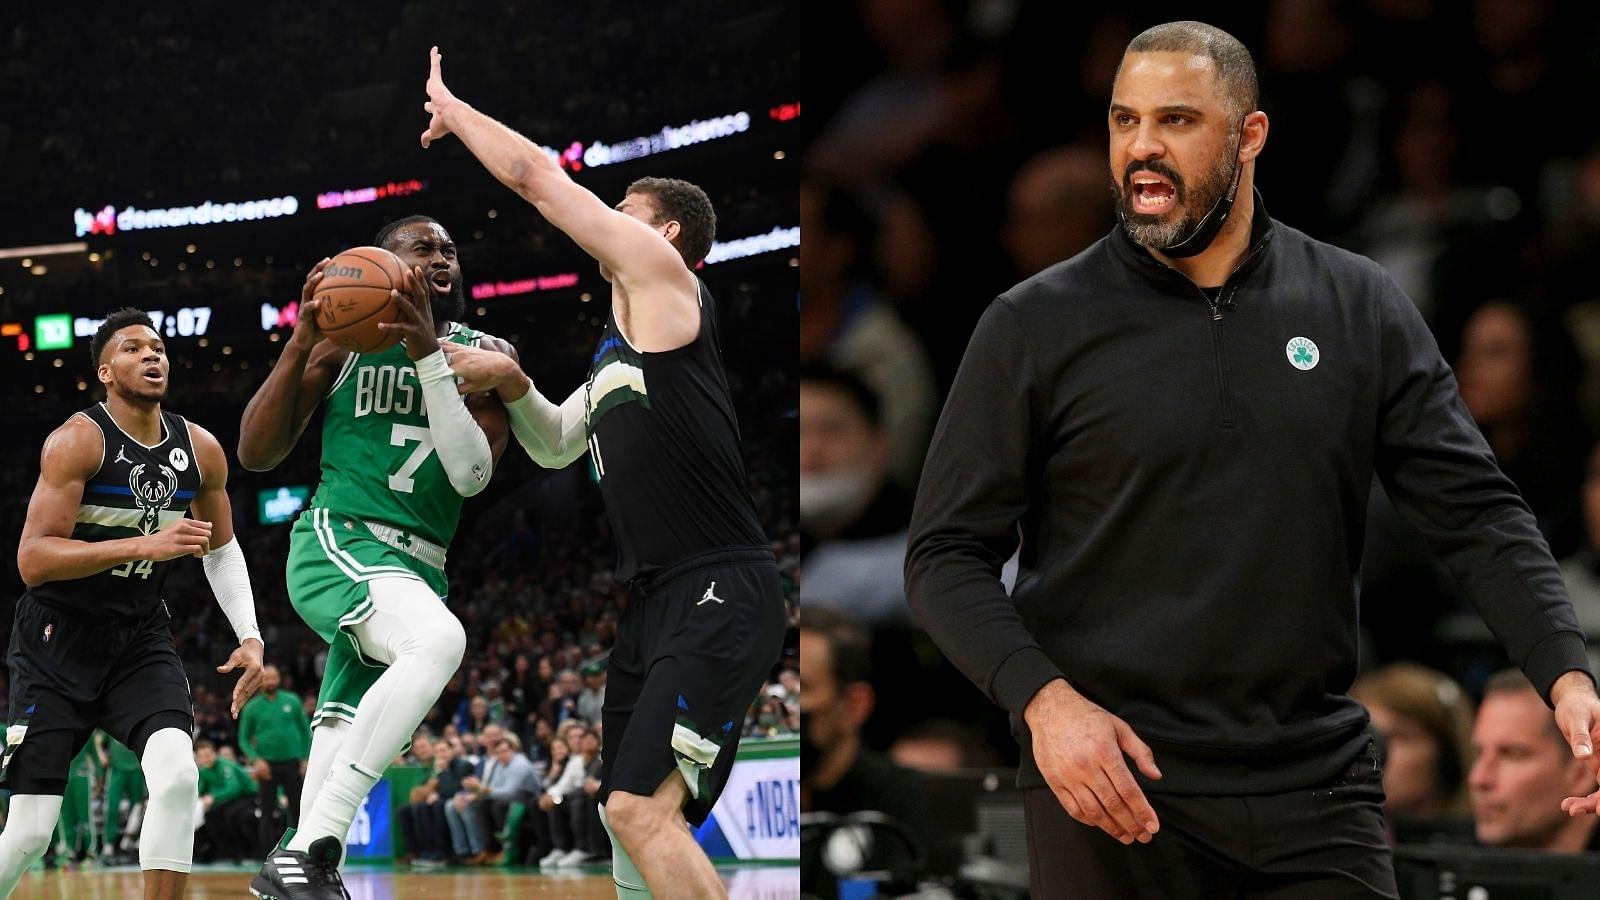 "Bucks have good rim protectors, but it’s not Wilt Chamberlain out there": Ime Udoka tries playing mental games, NBA Twitter tells him to use Bill Russell's name being Celtics coach